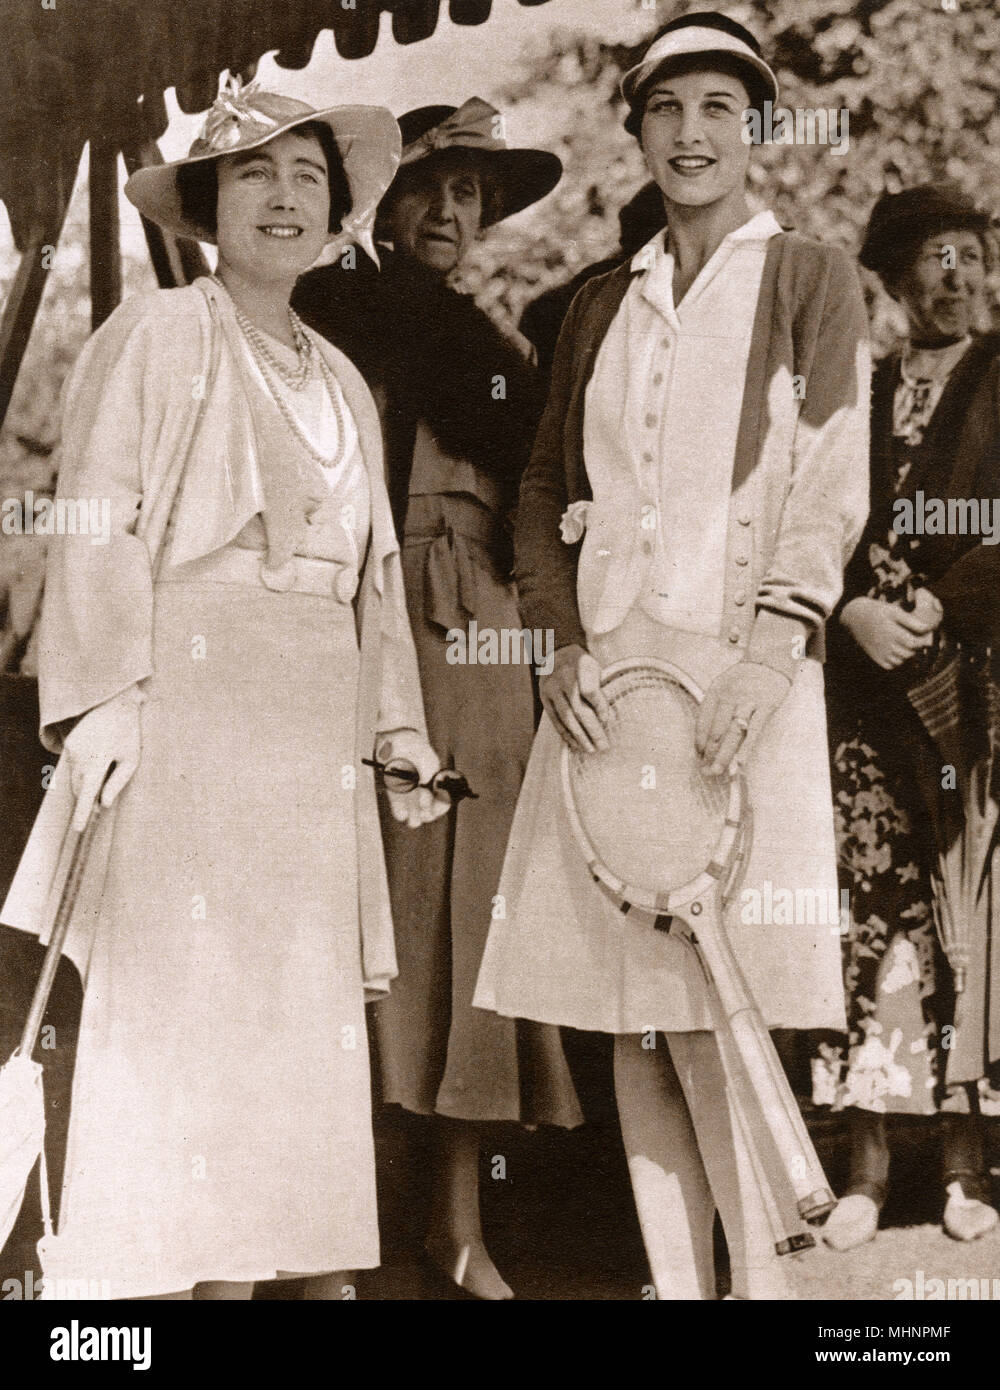 Elizabeth, Duchess of York (later Elizabeth, the Queen Mother 1900-2002) and Helen Wills Moody (1905-1998) at the Lawn Tennis Championships at Wimbledon. Princess Marie Louise of Schleswig-Holstein (1872-1956) stands behind the     Date: 1935 Stock Photo